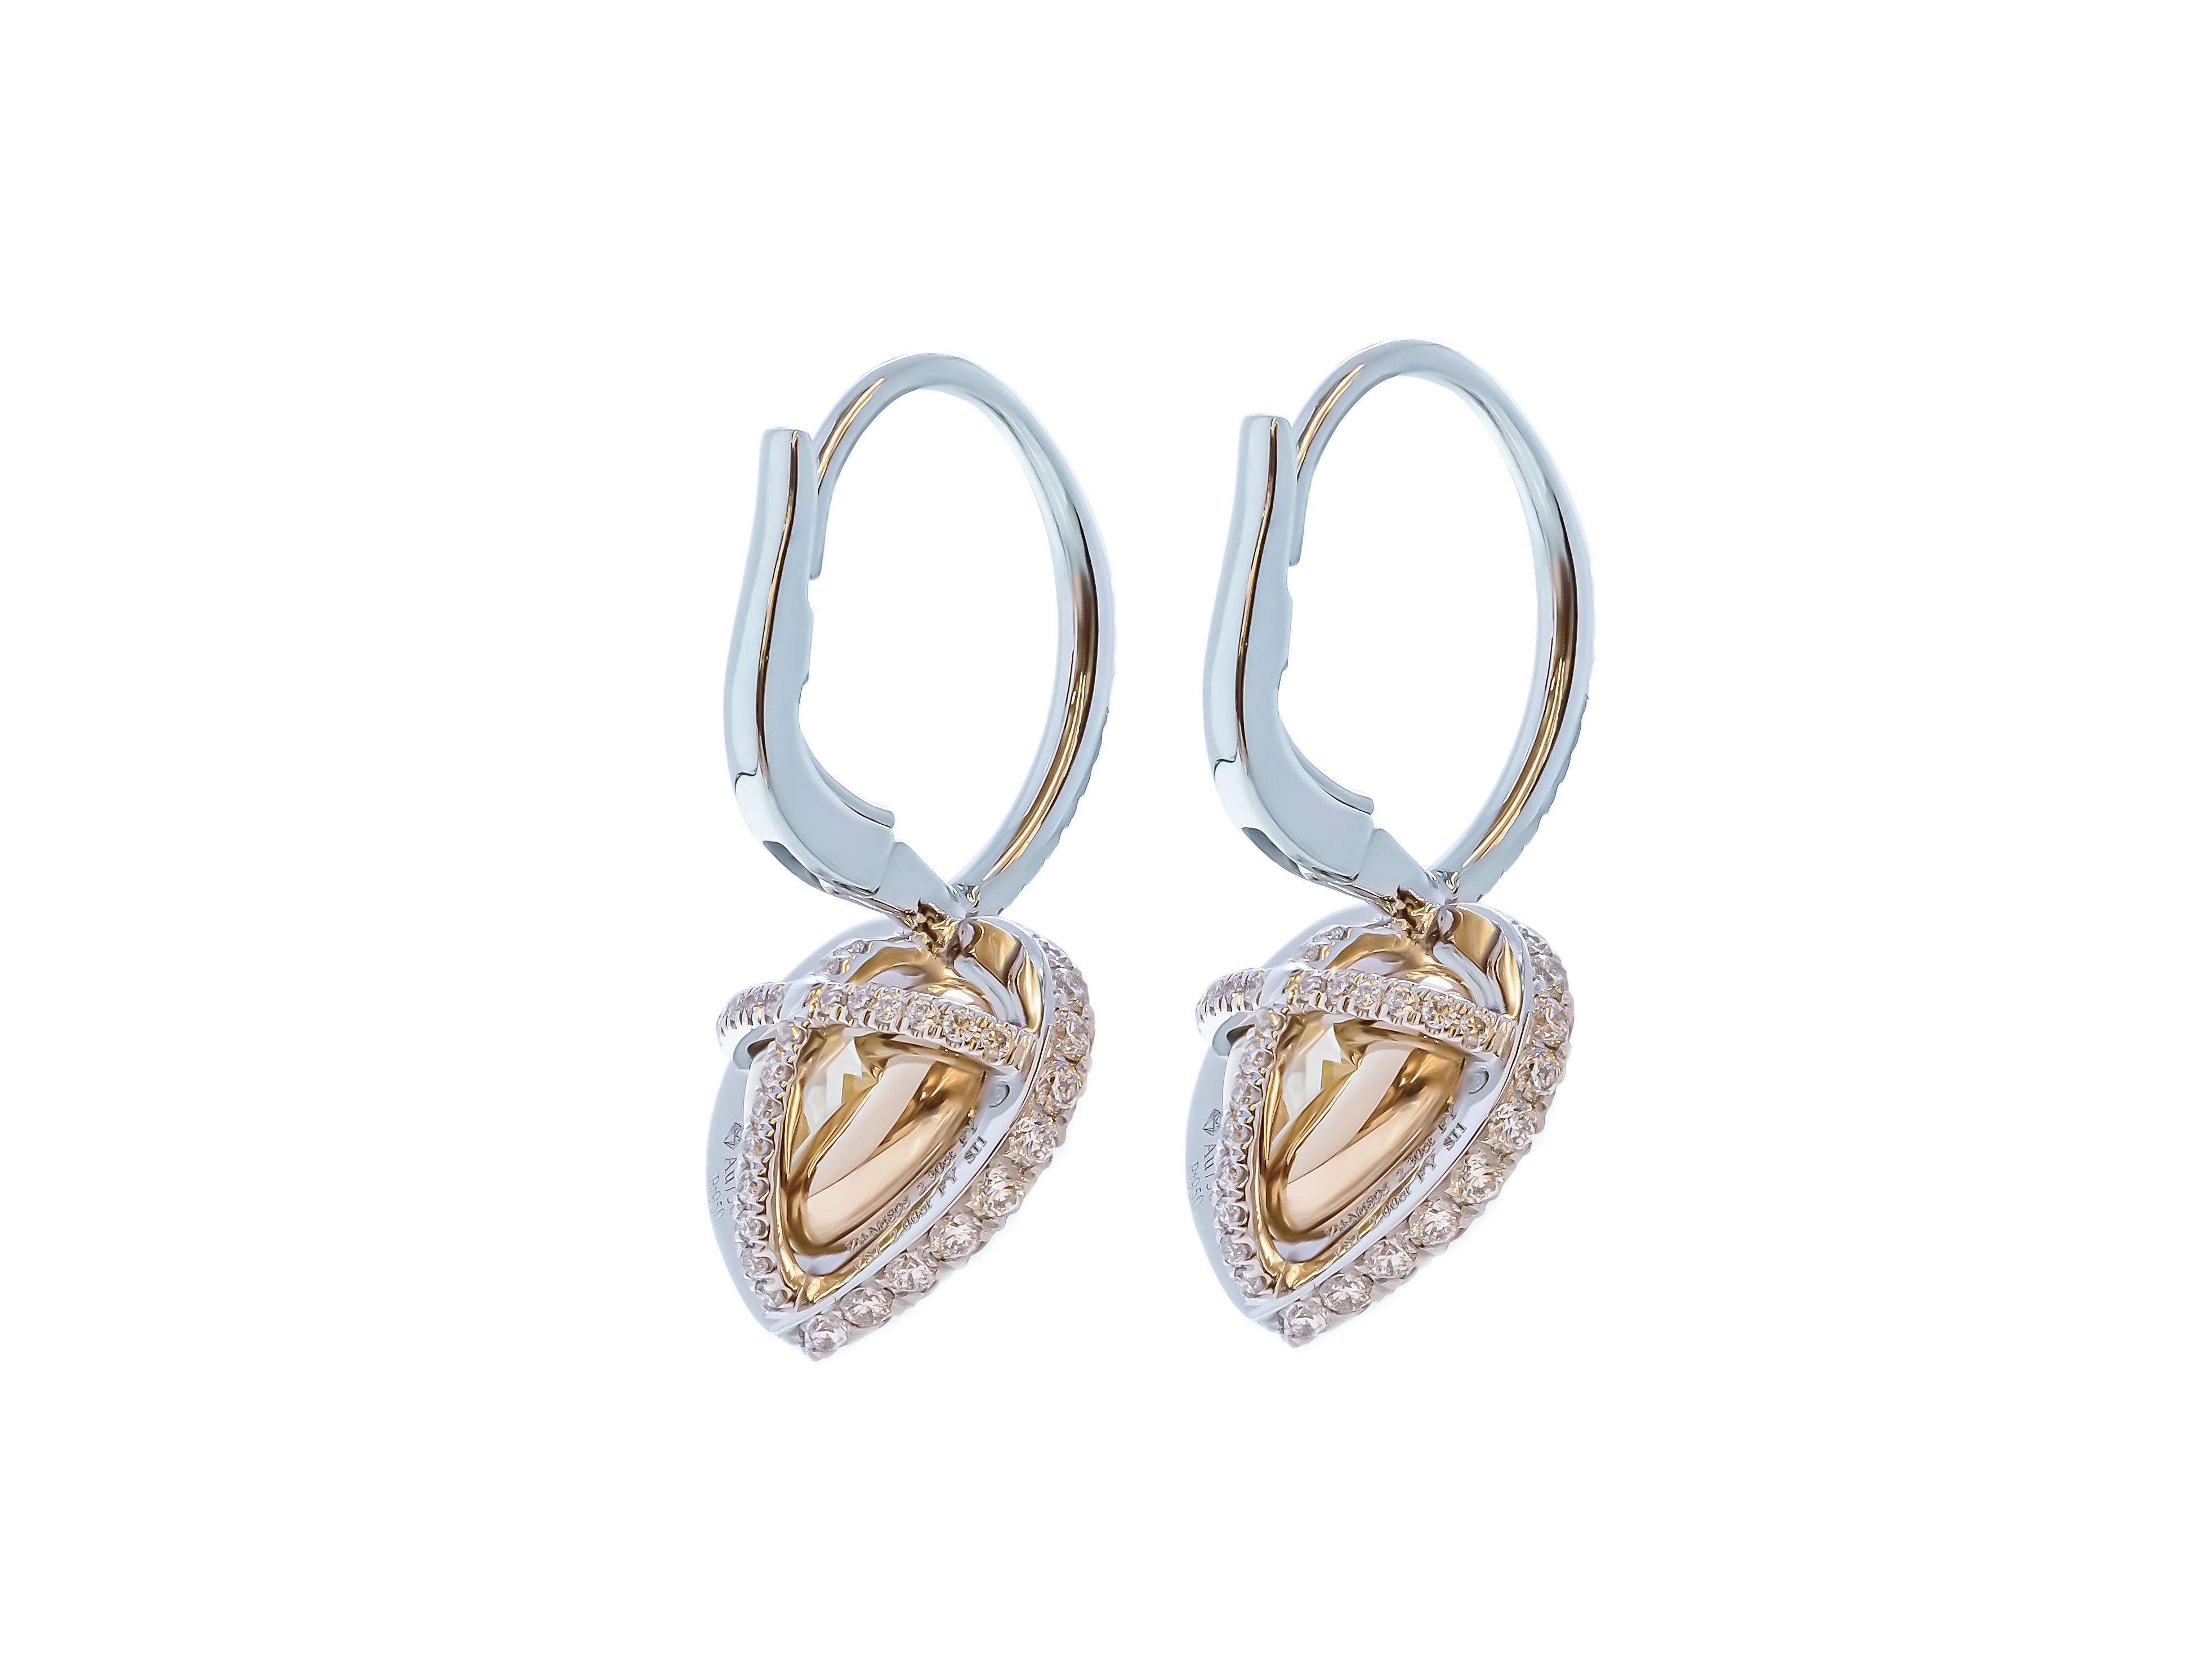 Welcome to our exquisite collection of GIA Certified Double Edge Halo Lever Back Earrings in 18K Yellow Gold & Platinum, adorned with two stunning GIA Heart Shape Diamonds. Meticulously crafted to perfection, these earrings boast an unparalleled